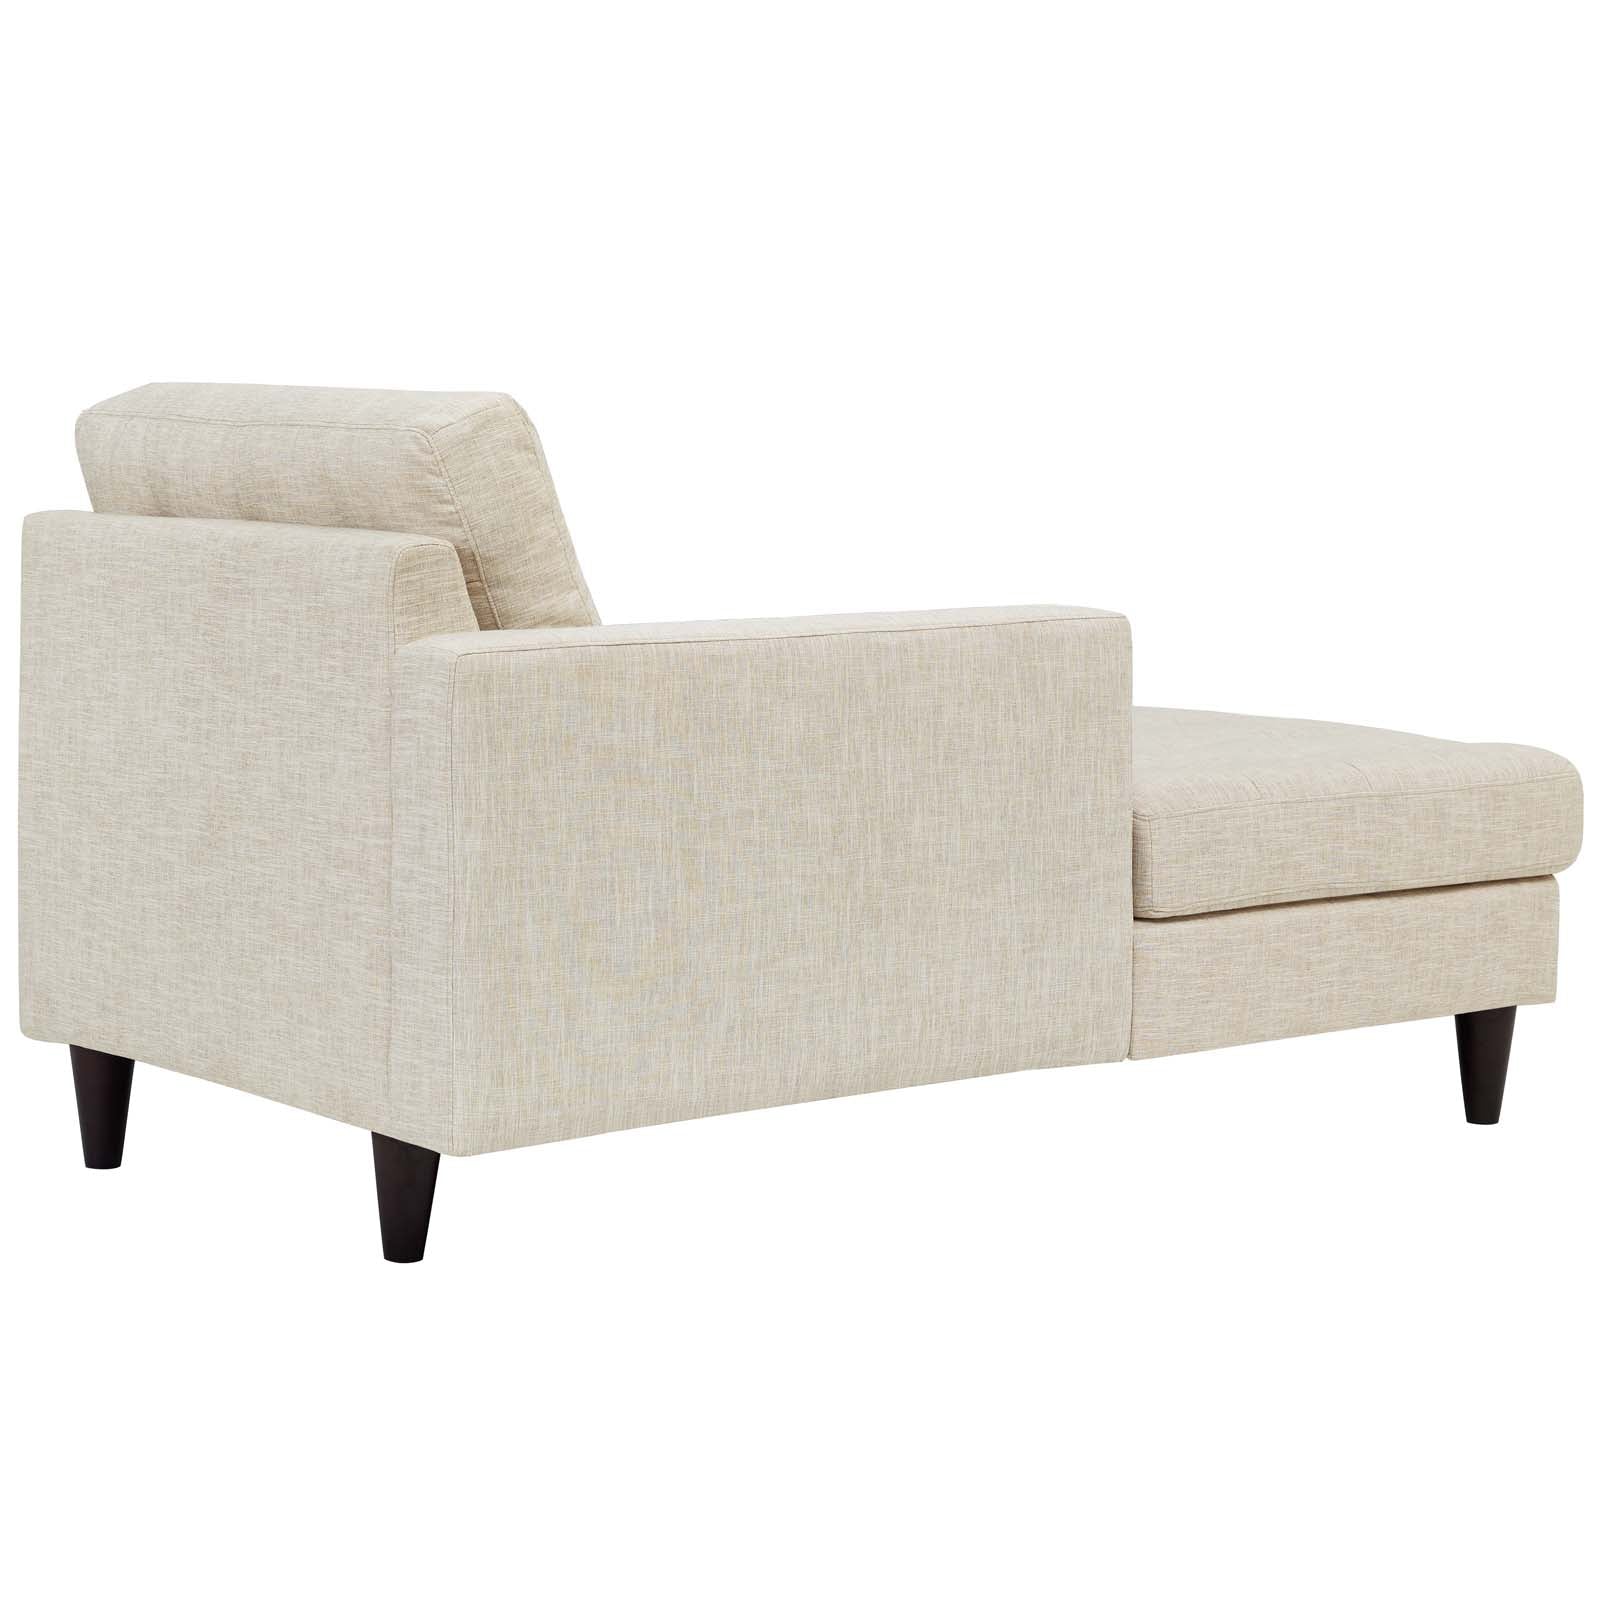 Modway Accent Chairs - Empress Left Arm Upholstered Fabric Chaise Beige